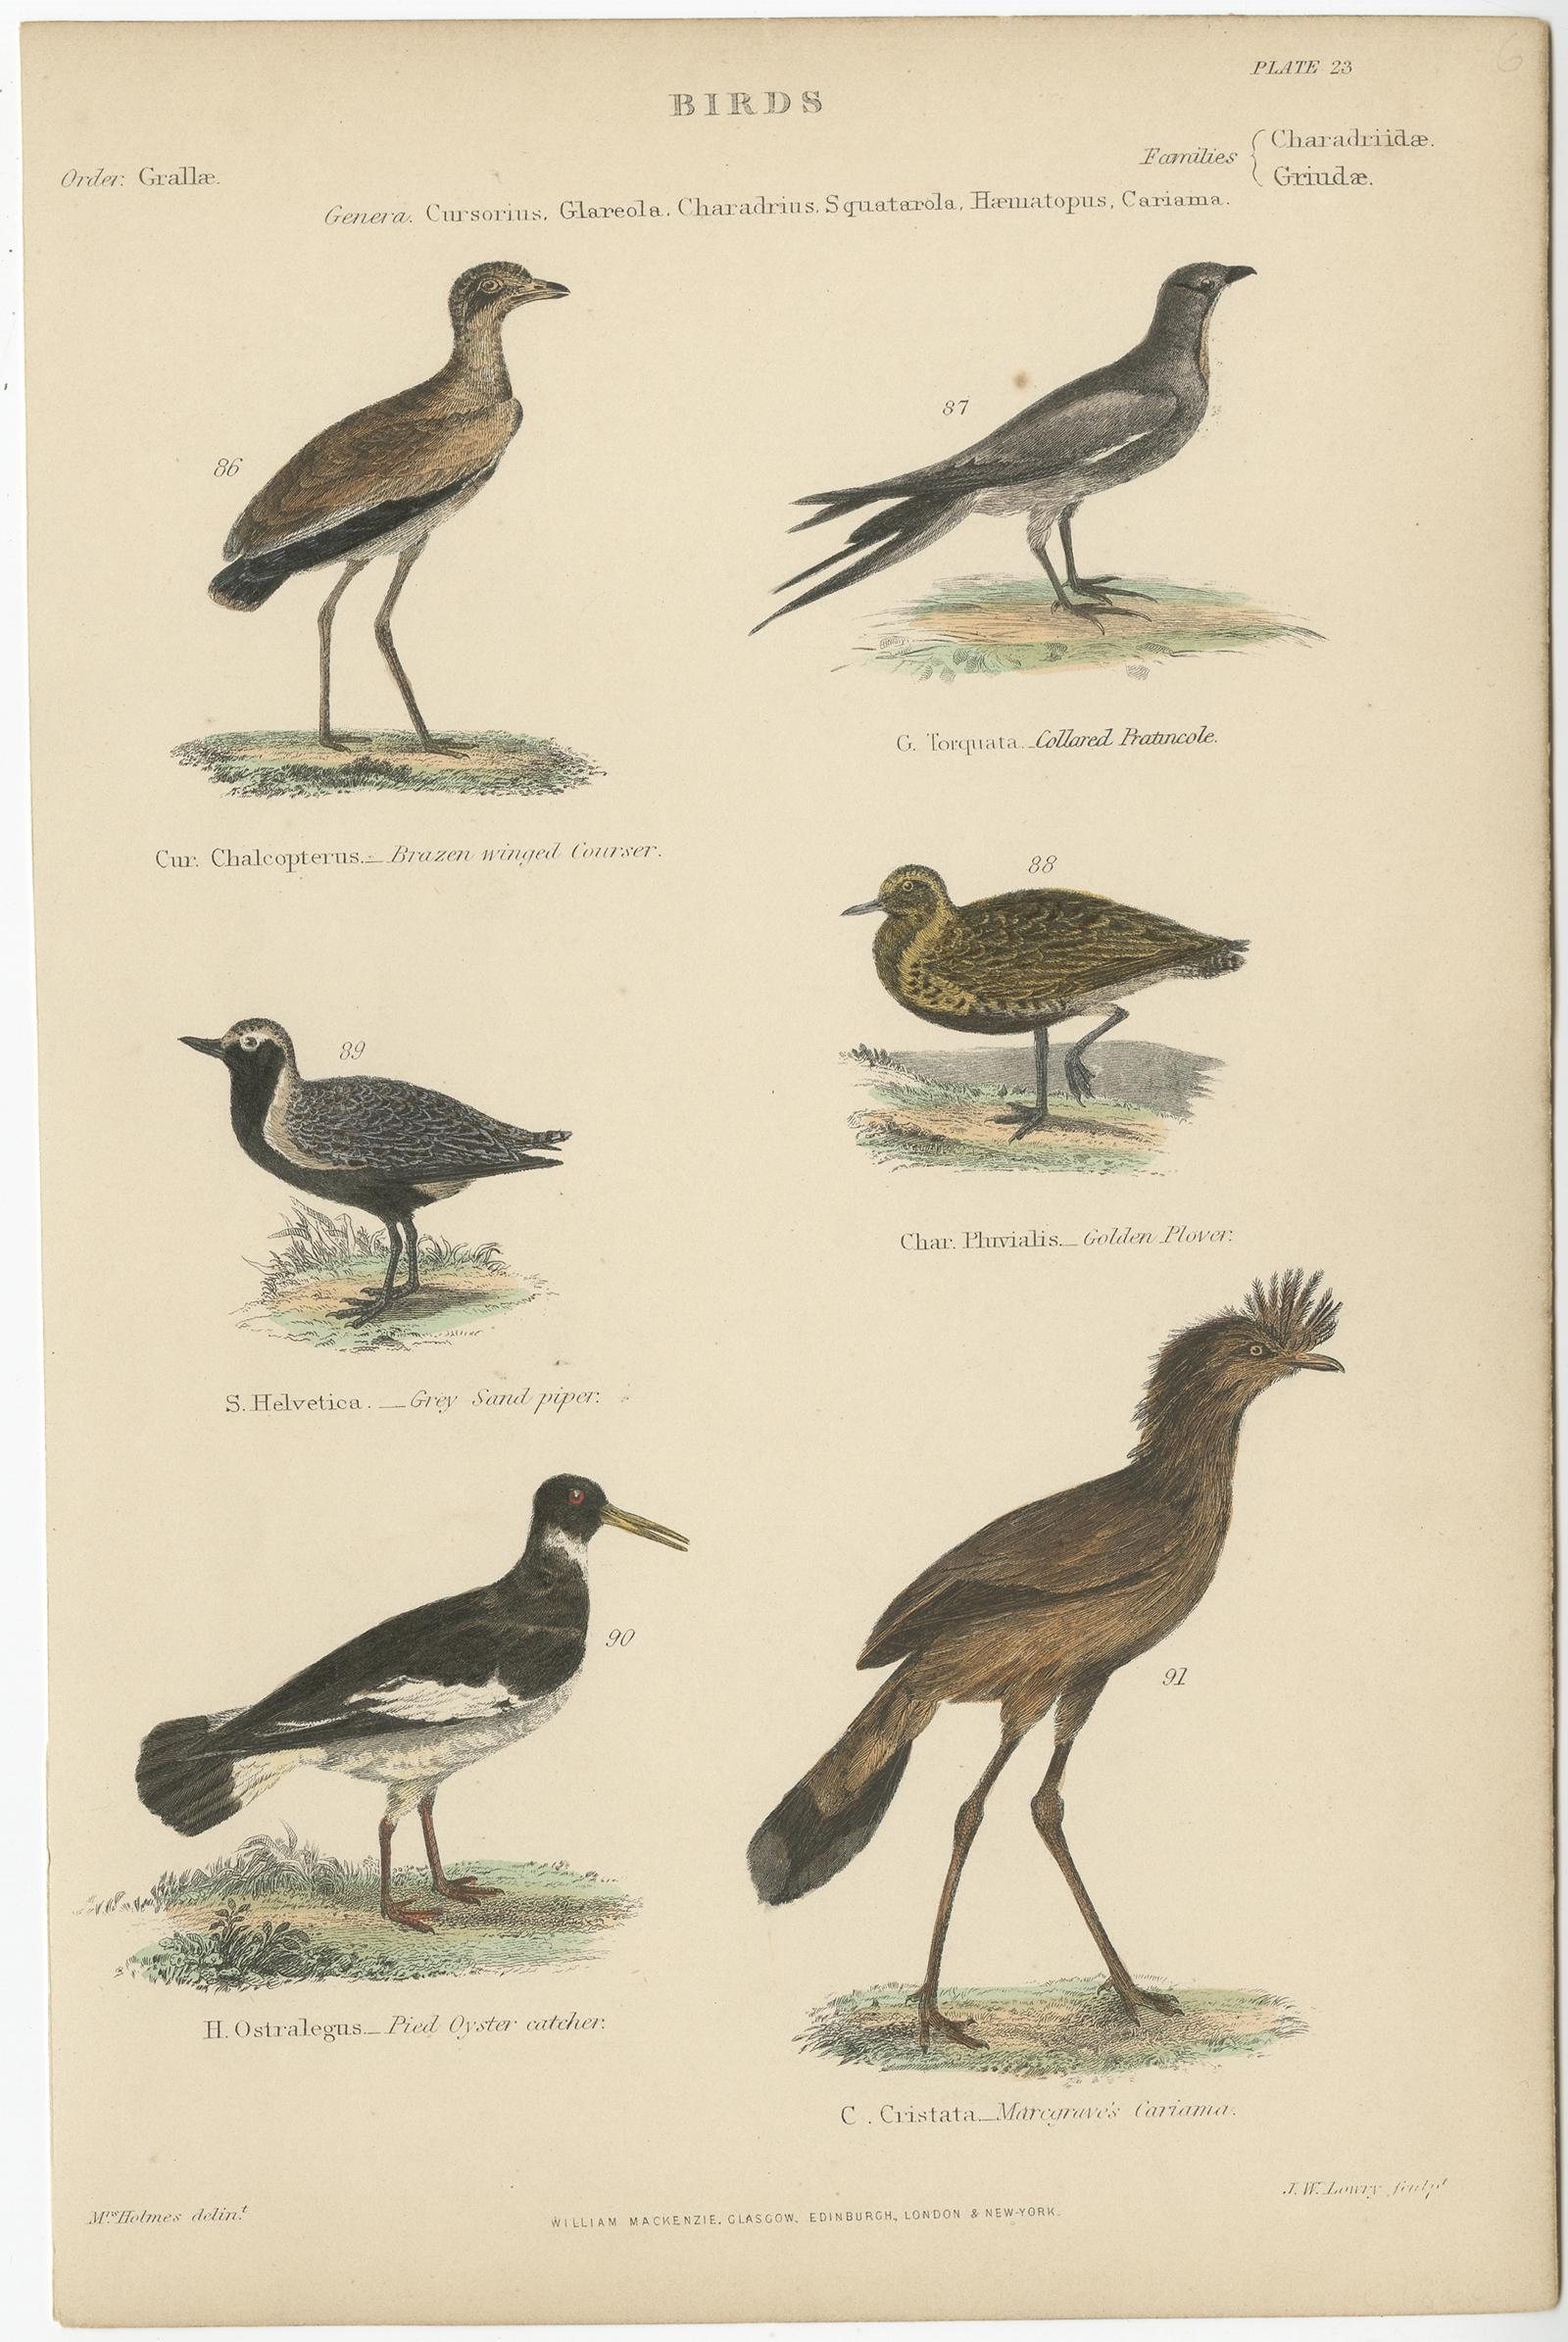 Antique bird print depicting the brazen winged courser, collared pratincole, grey sandpiper, golden plover, pied oyster catcher and Marcgrave's Cariama. This print originates from 'Museum of Natural History' by Sir John Richardson.

Artists and